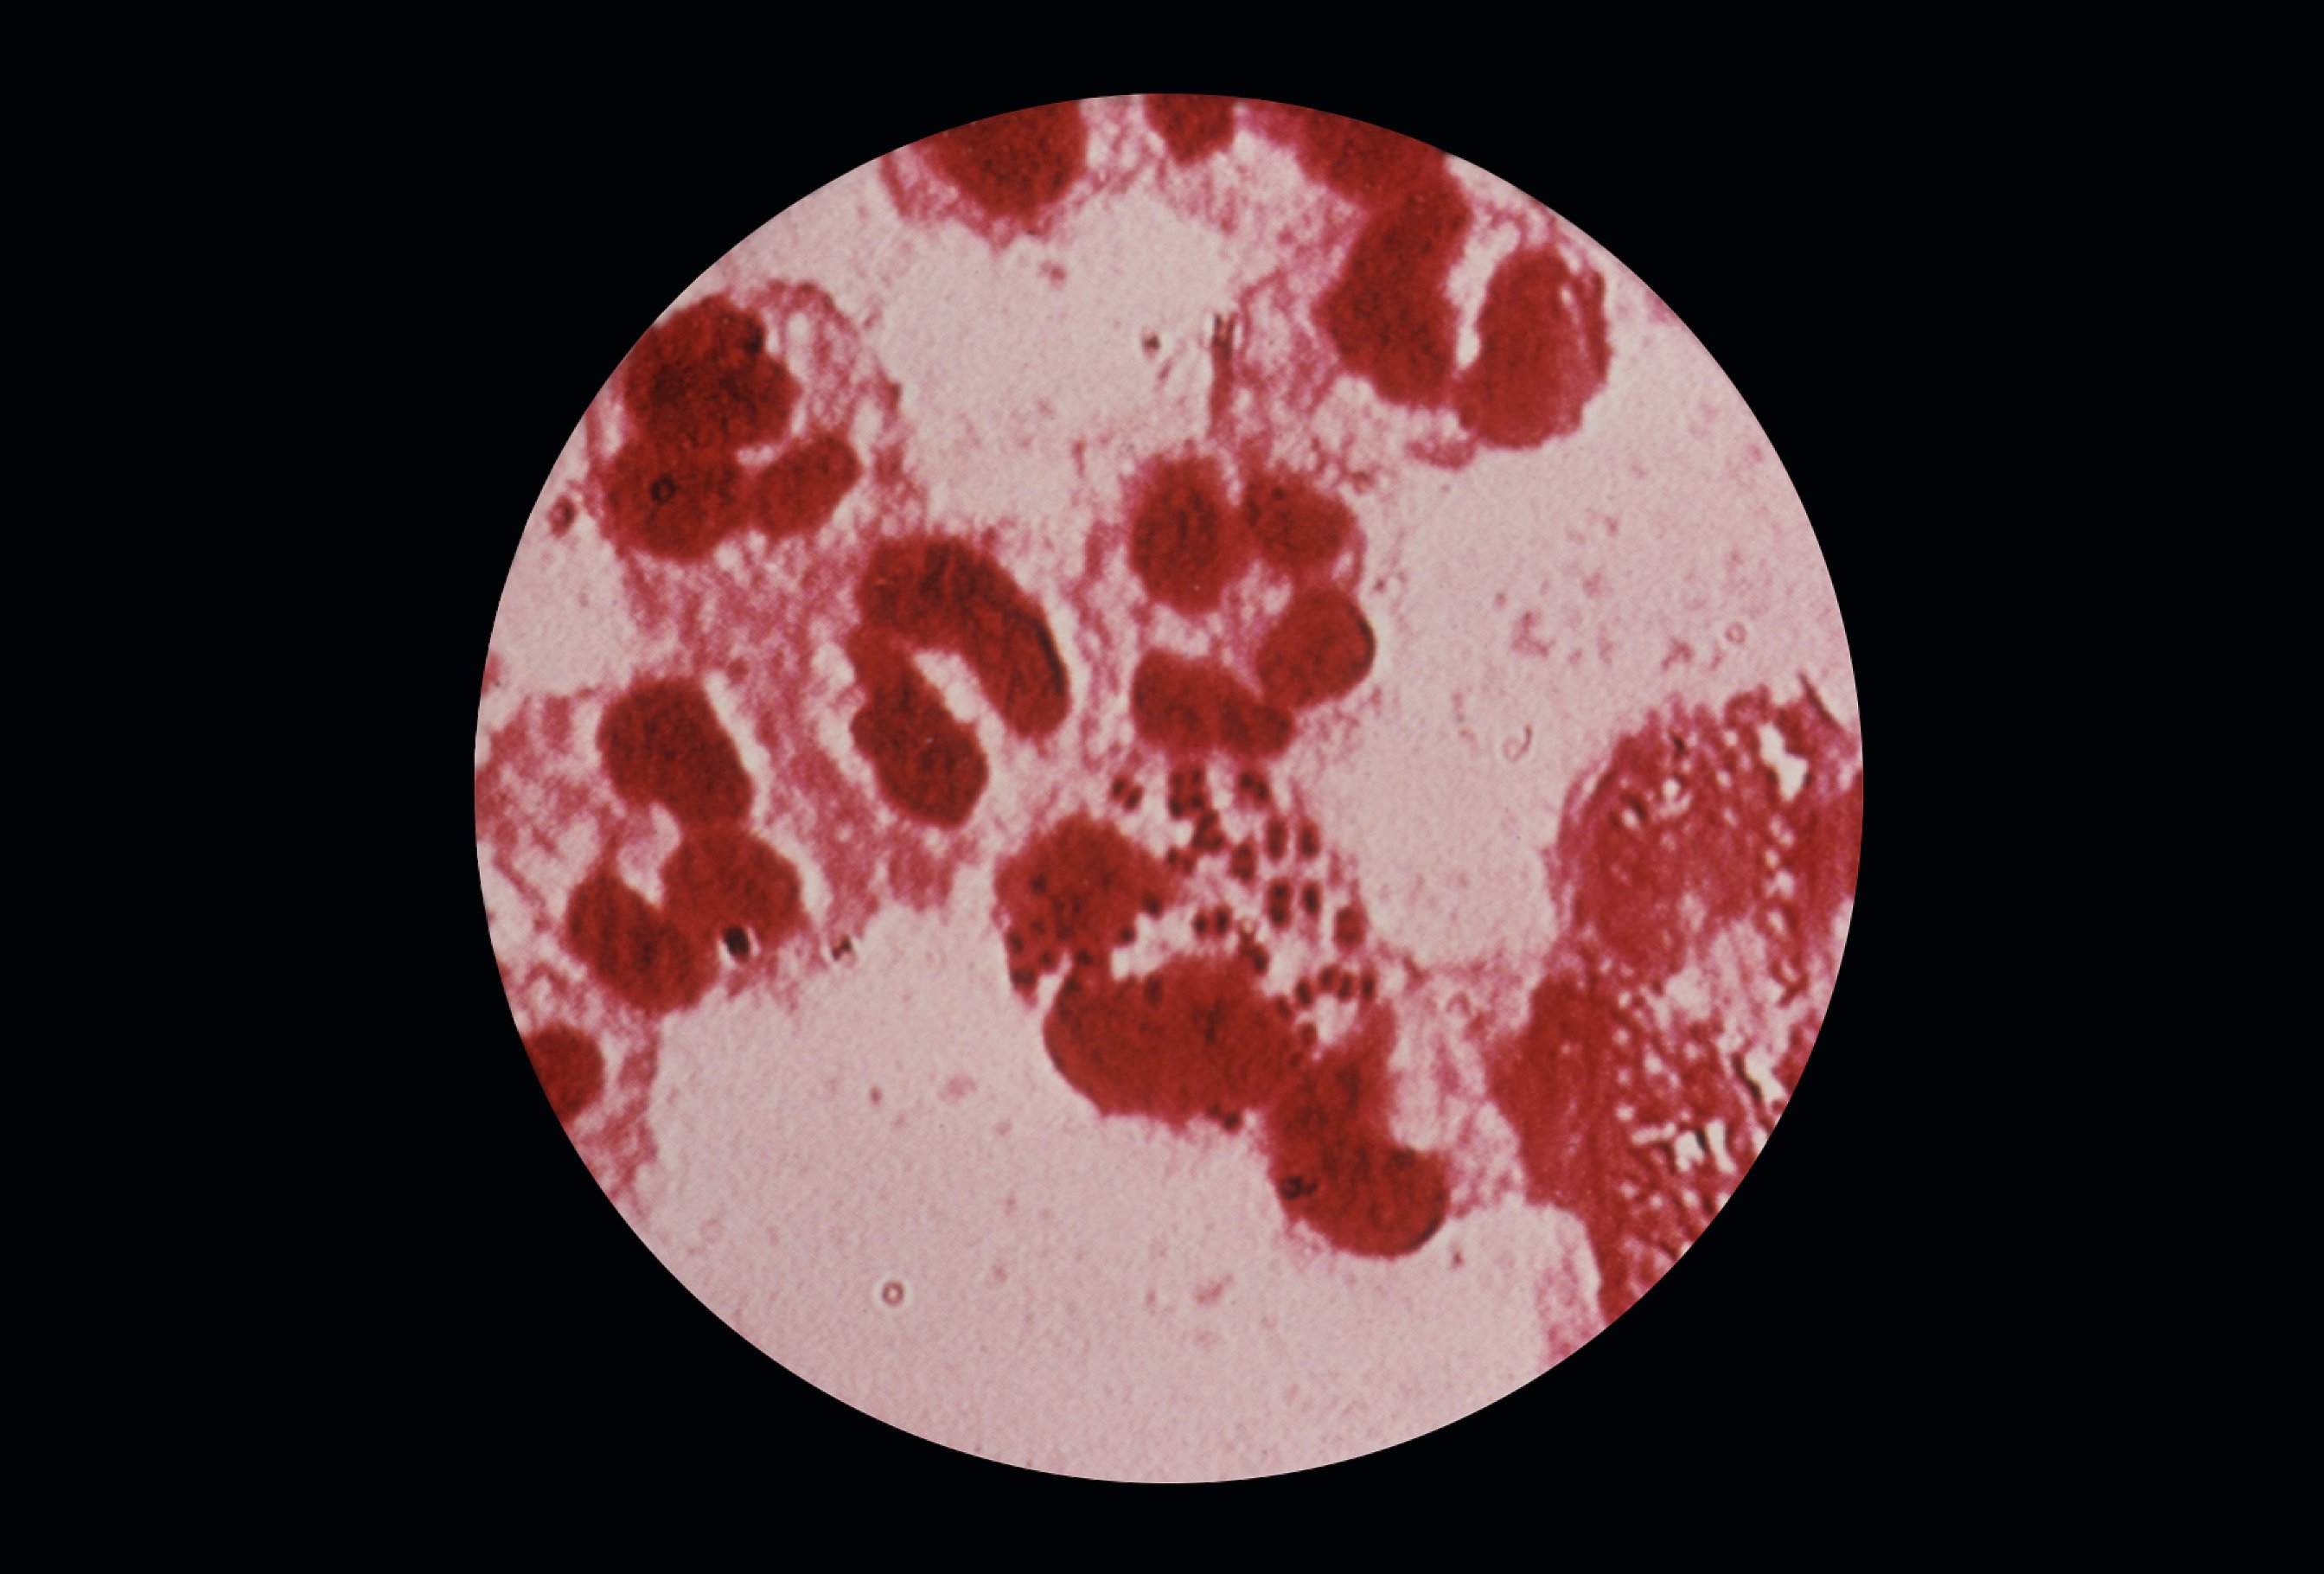 gonorrhea symptoms discharge color